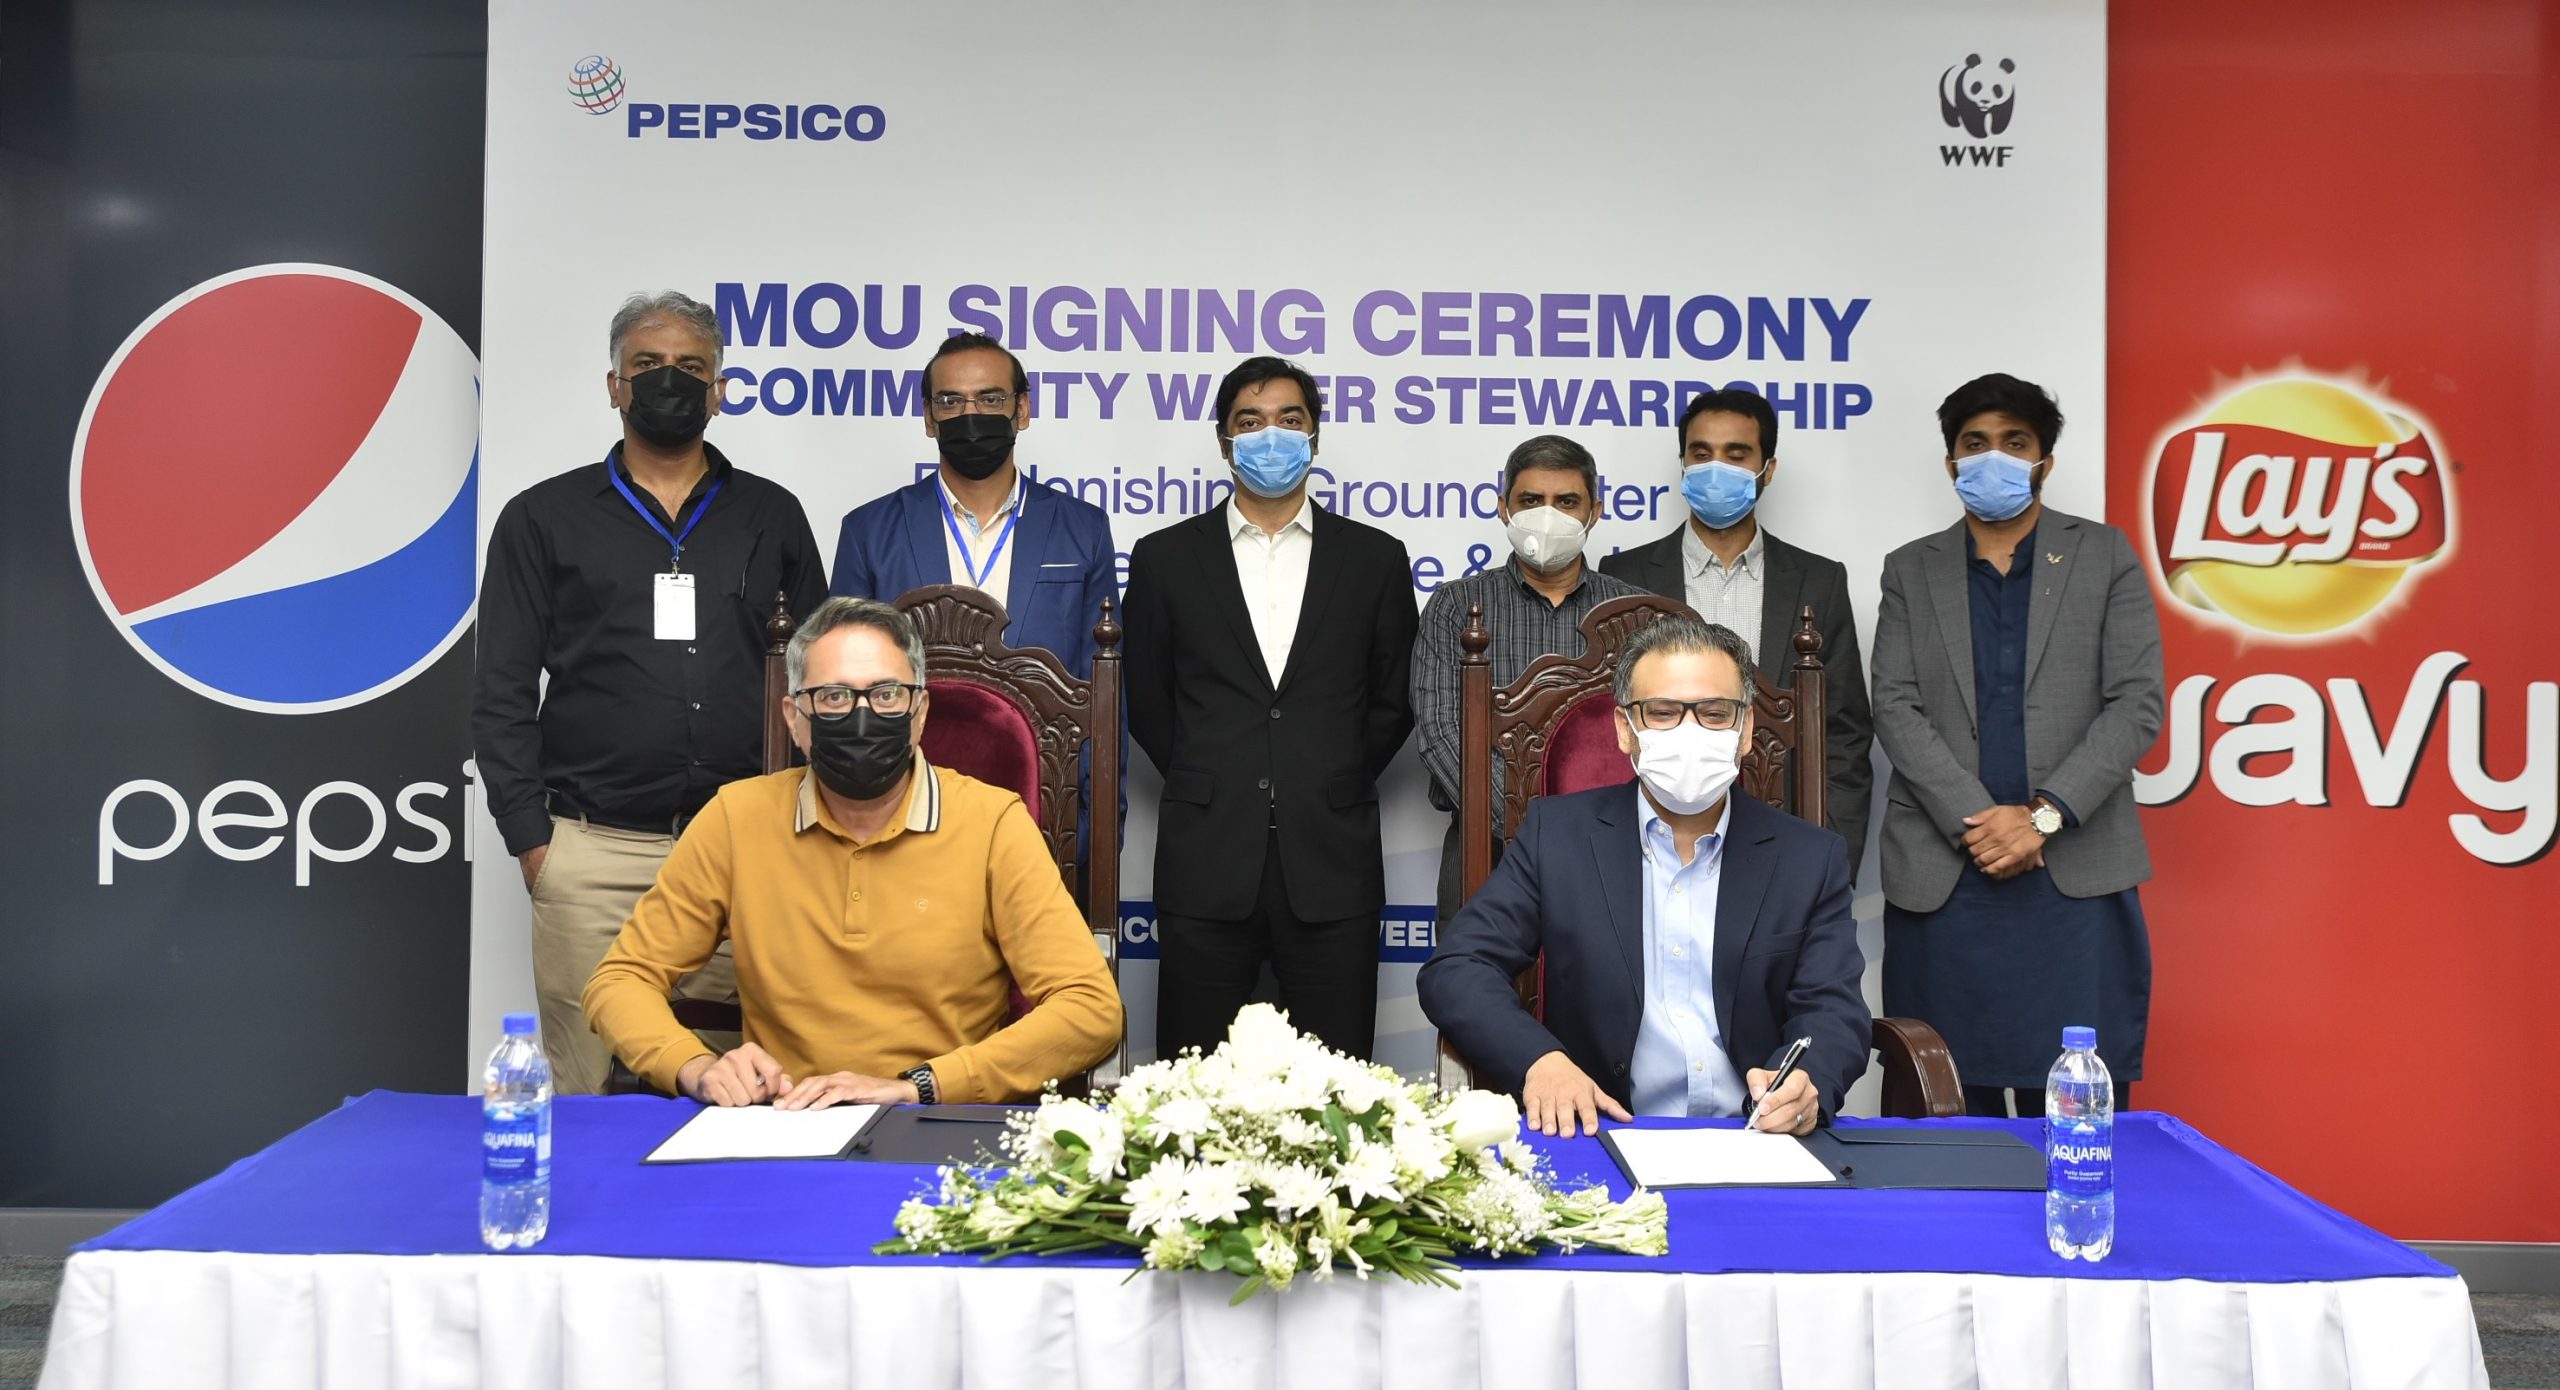 PepsiCo invests PKR 160 million to launch community water stewardship project with WWF-Pakistan